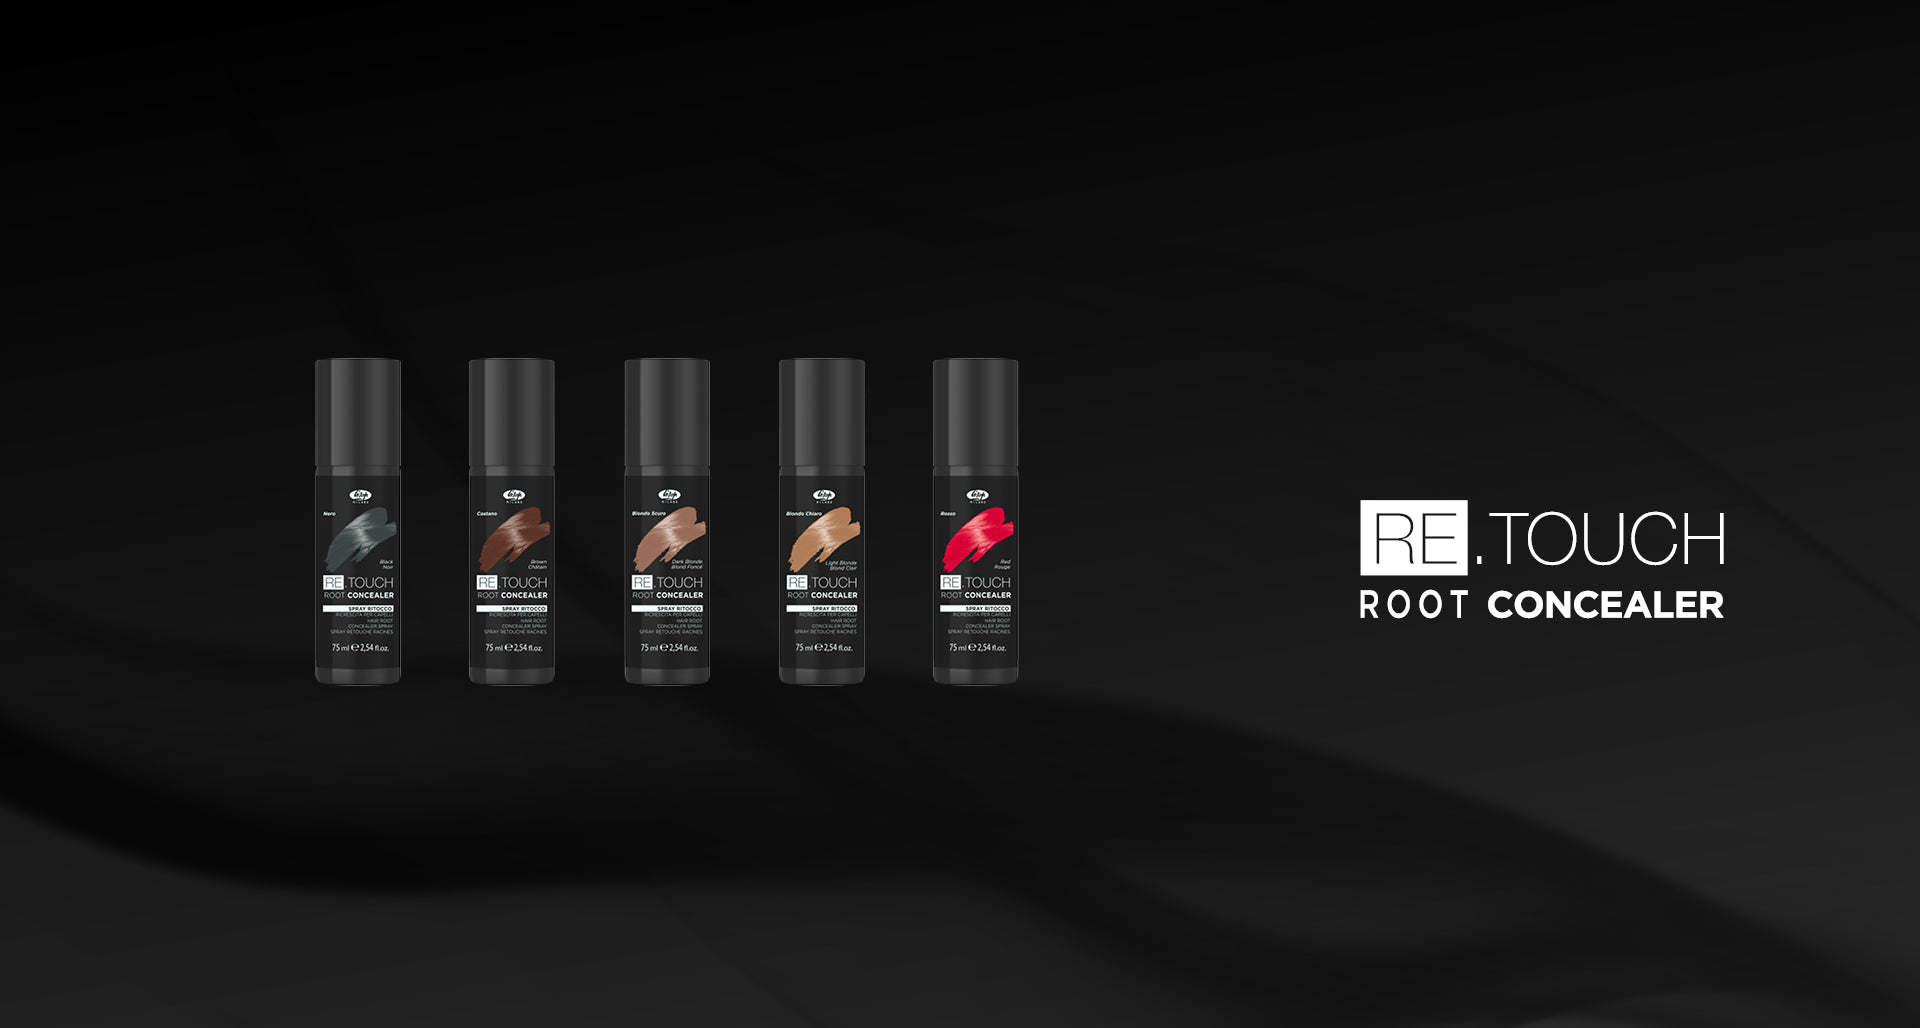 Retouch Root Concealer